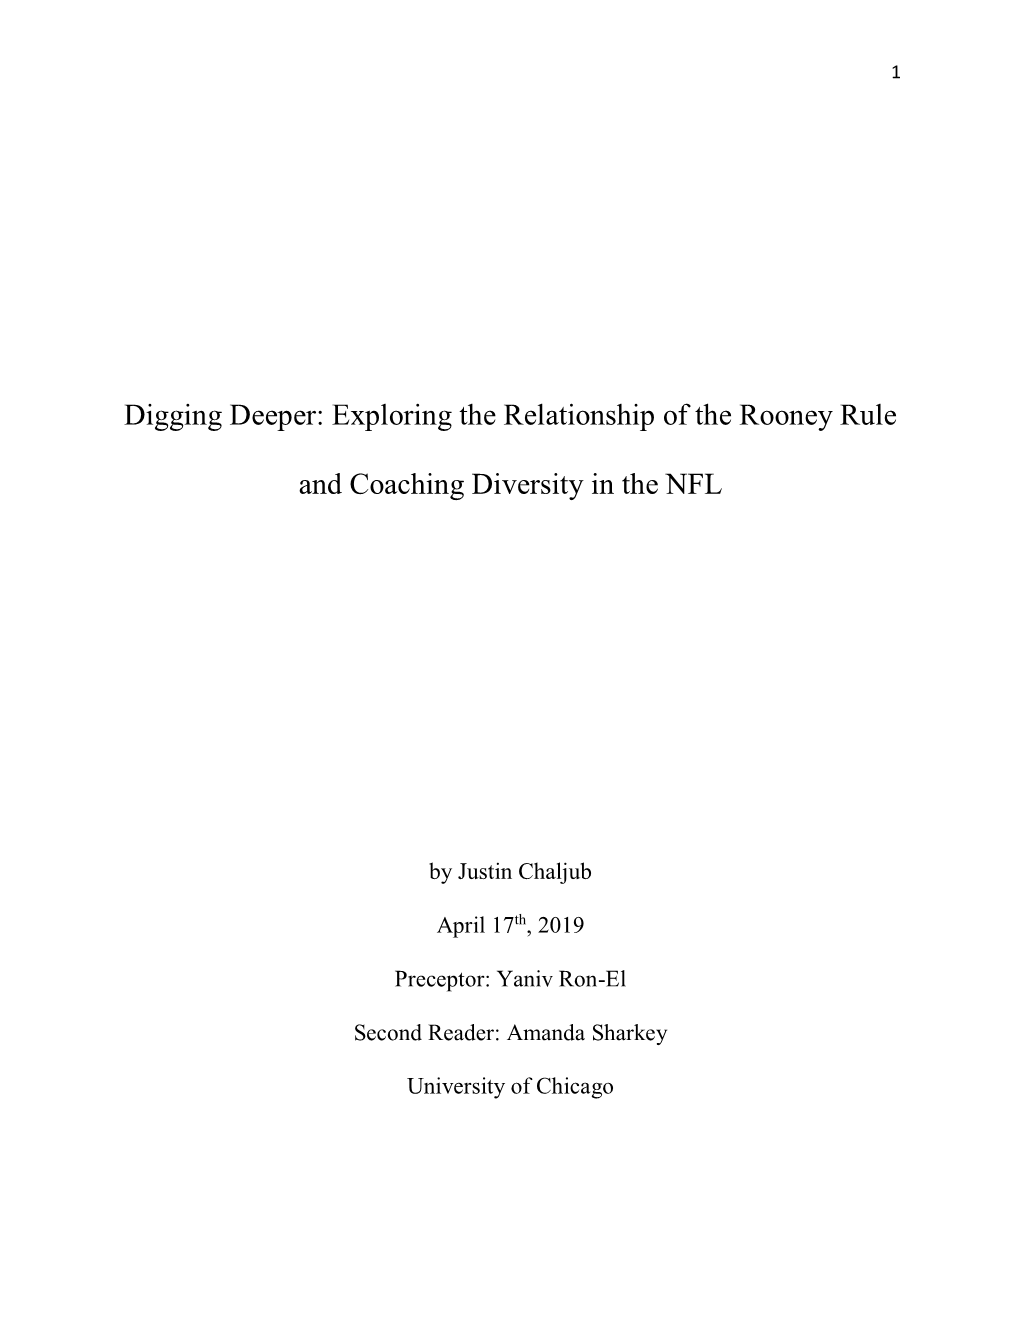 Exploring the Relationship of the Rooney Rule and Coaching